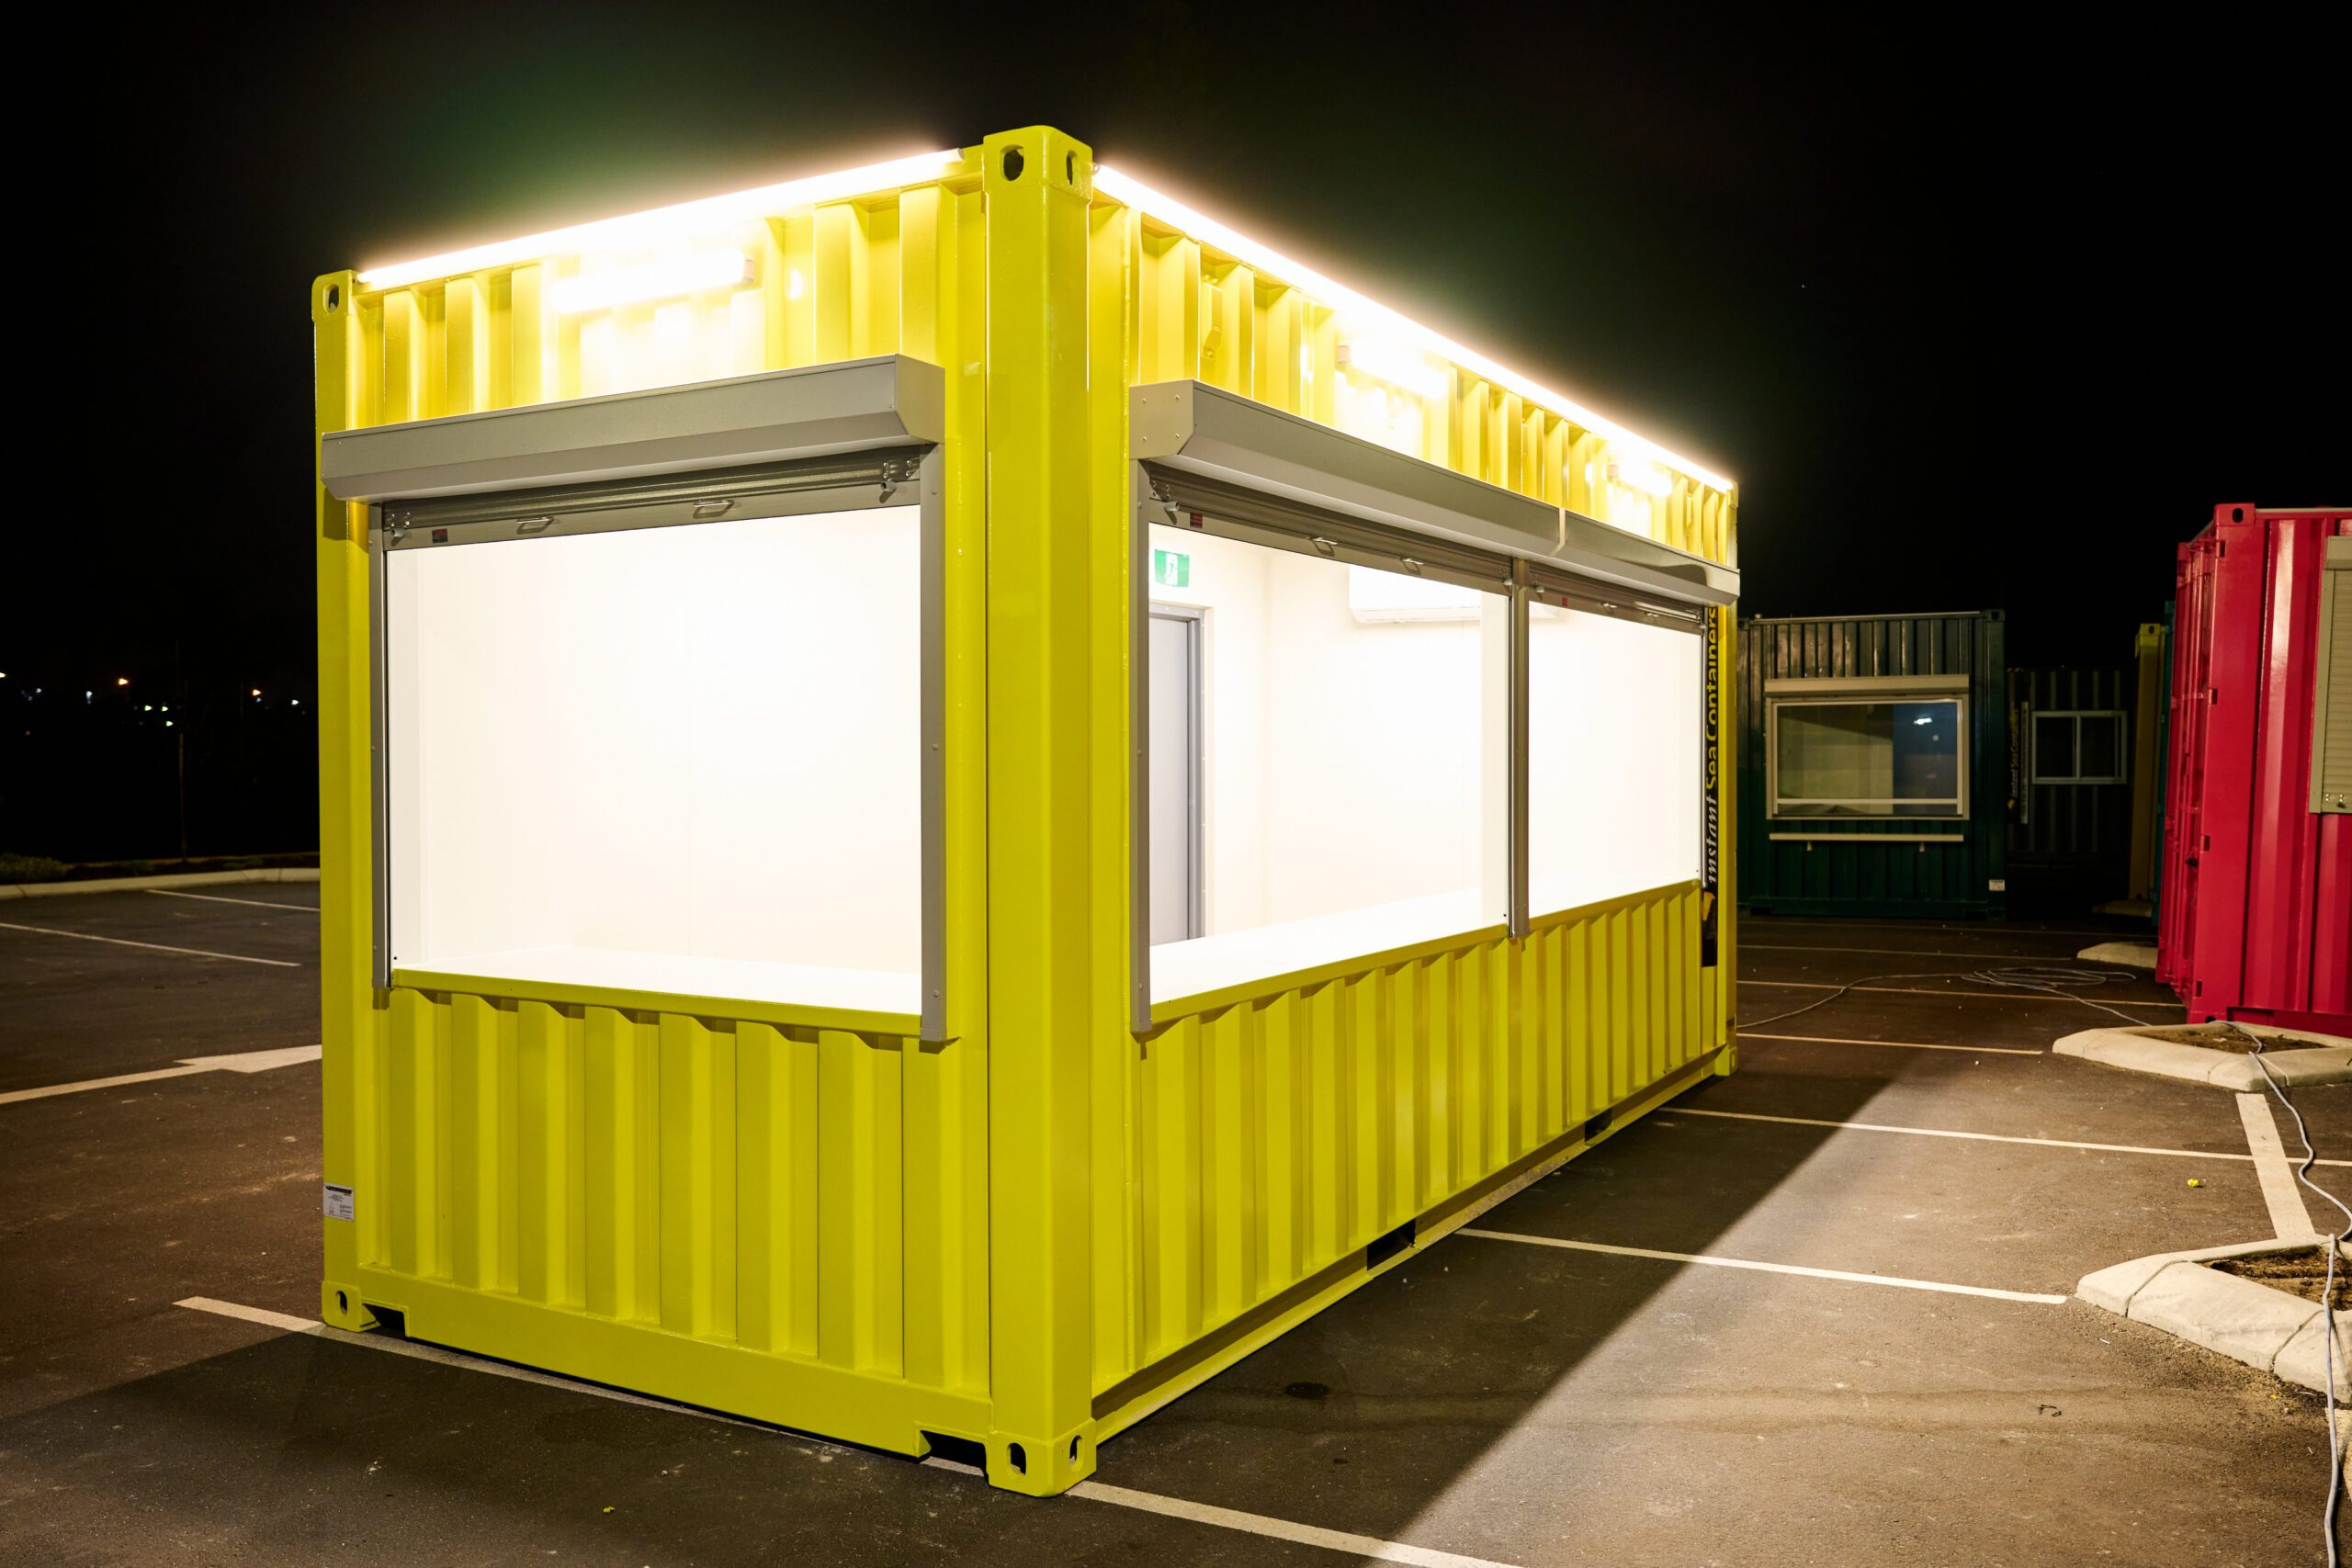 brightly lit, yellow Shipping Container Kiosk , given its large display windows and robust lighting setup for night-time operation